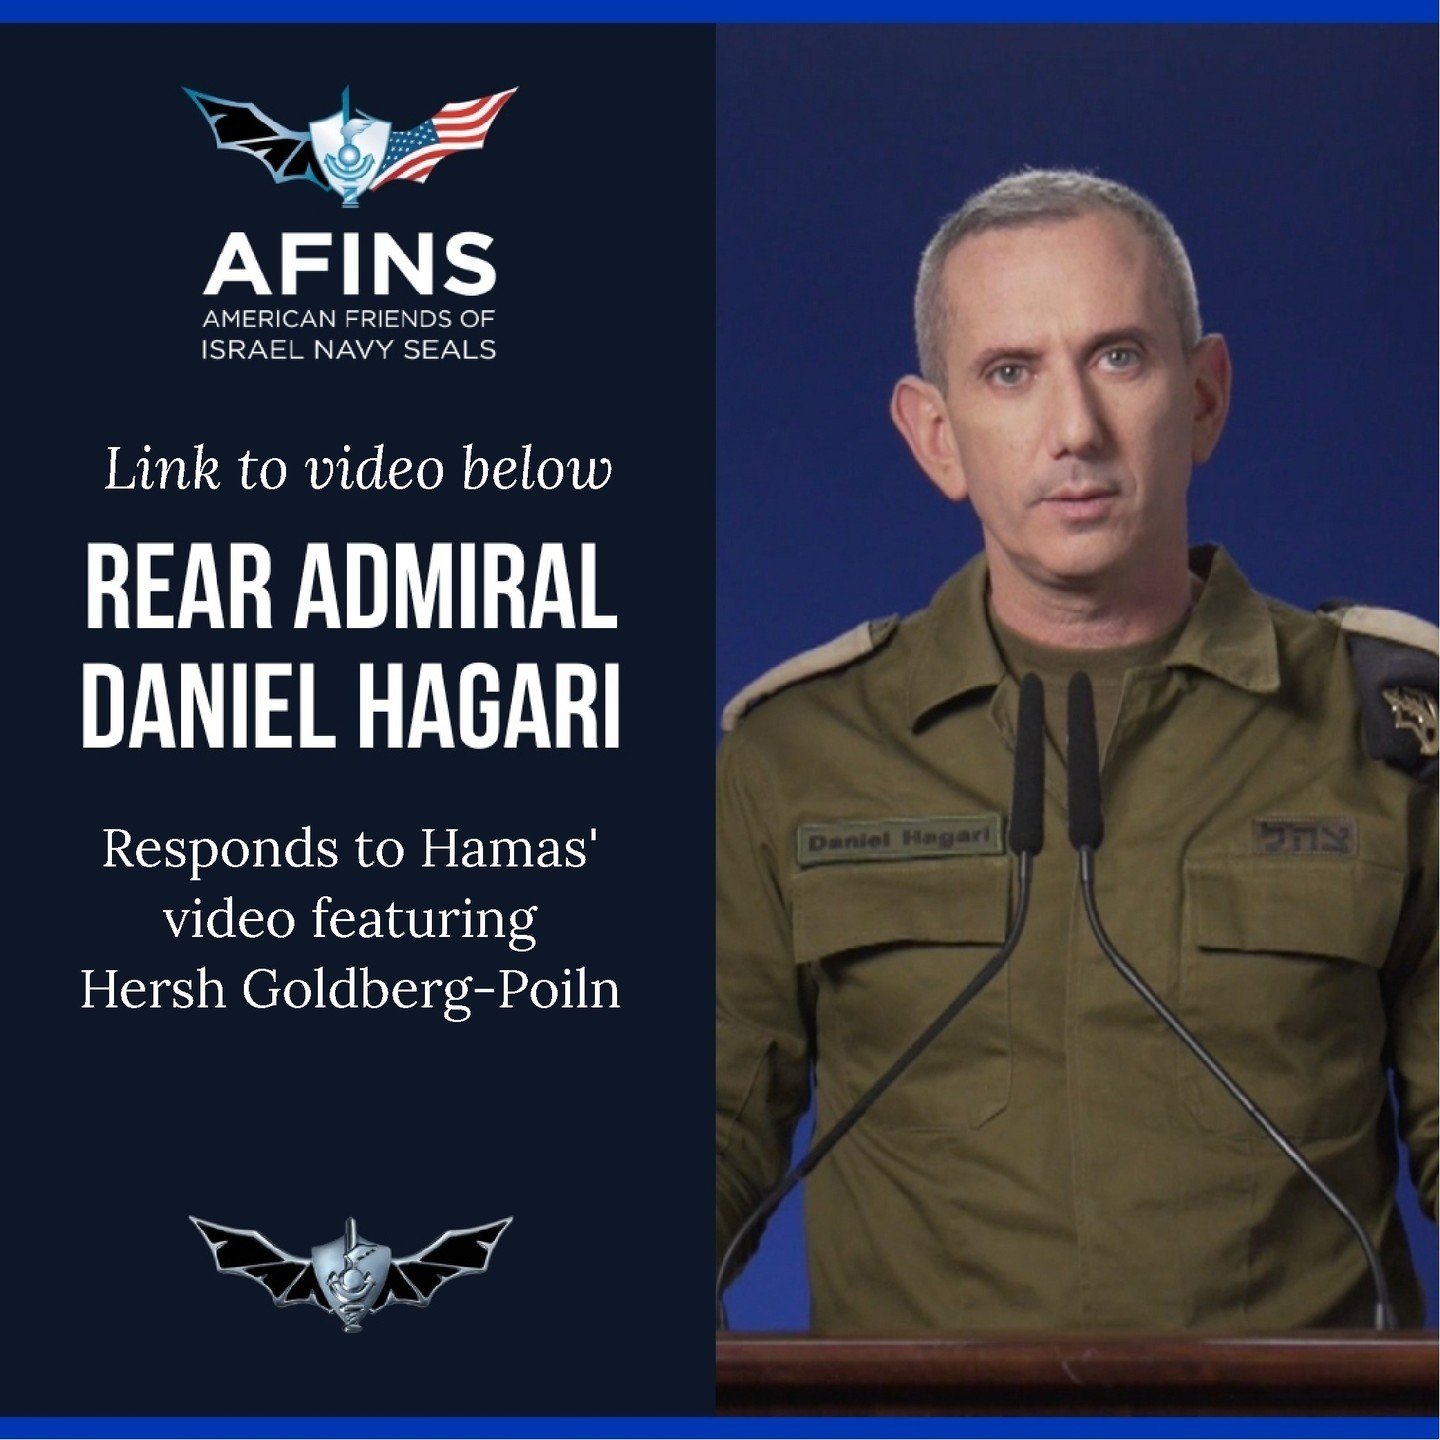 IDF Spokesperson Rear Admiral Daniel Hagari responds to Hamas' video featuring Hersh Goldberg-Poiln: 'This is an urgent call for action. We will leave no stone unturned in our efforts to find our hostages.'

Watch the video at https://youtu.be/Fq-NmM